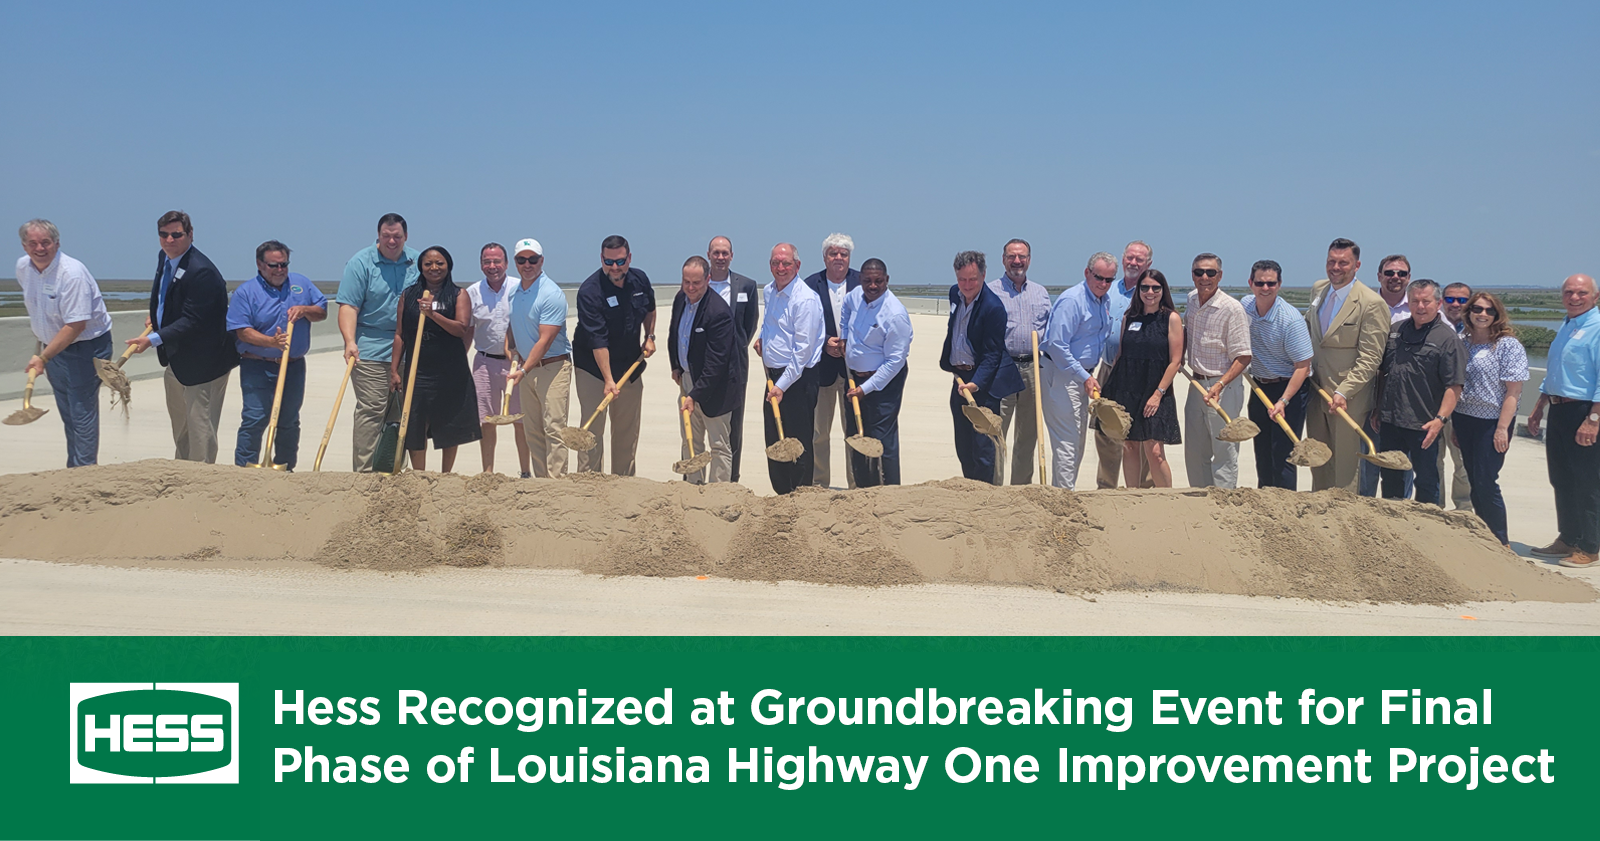 Hess Recognized at Groundbreaking Event for Final Phase of Louisiana Highway One Improvement Project